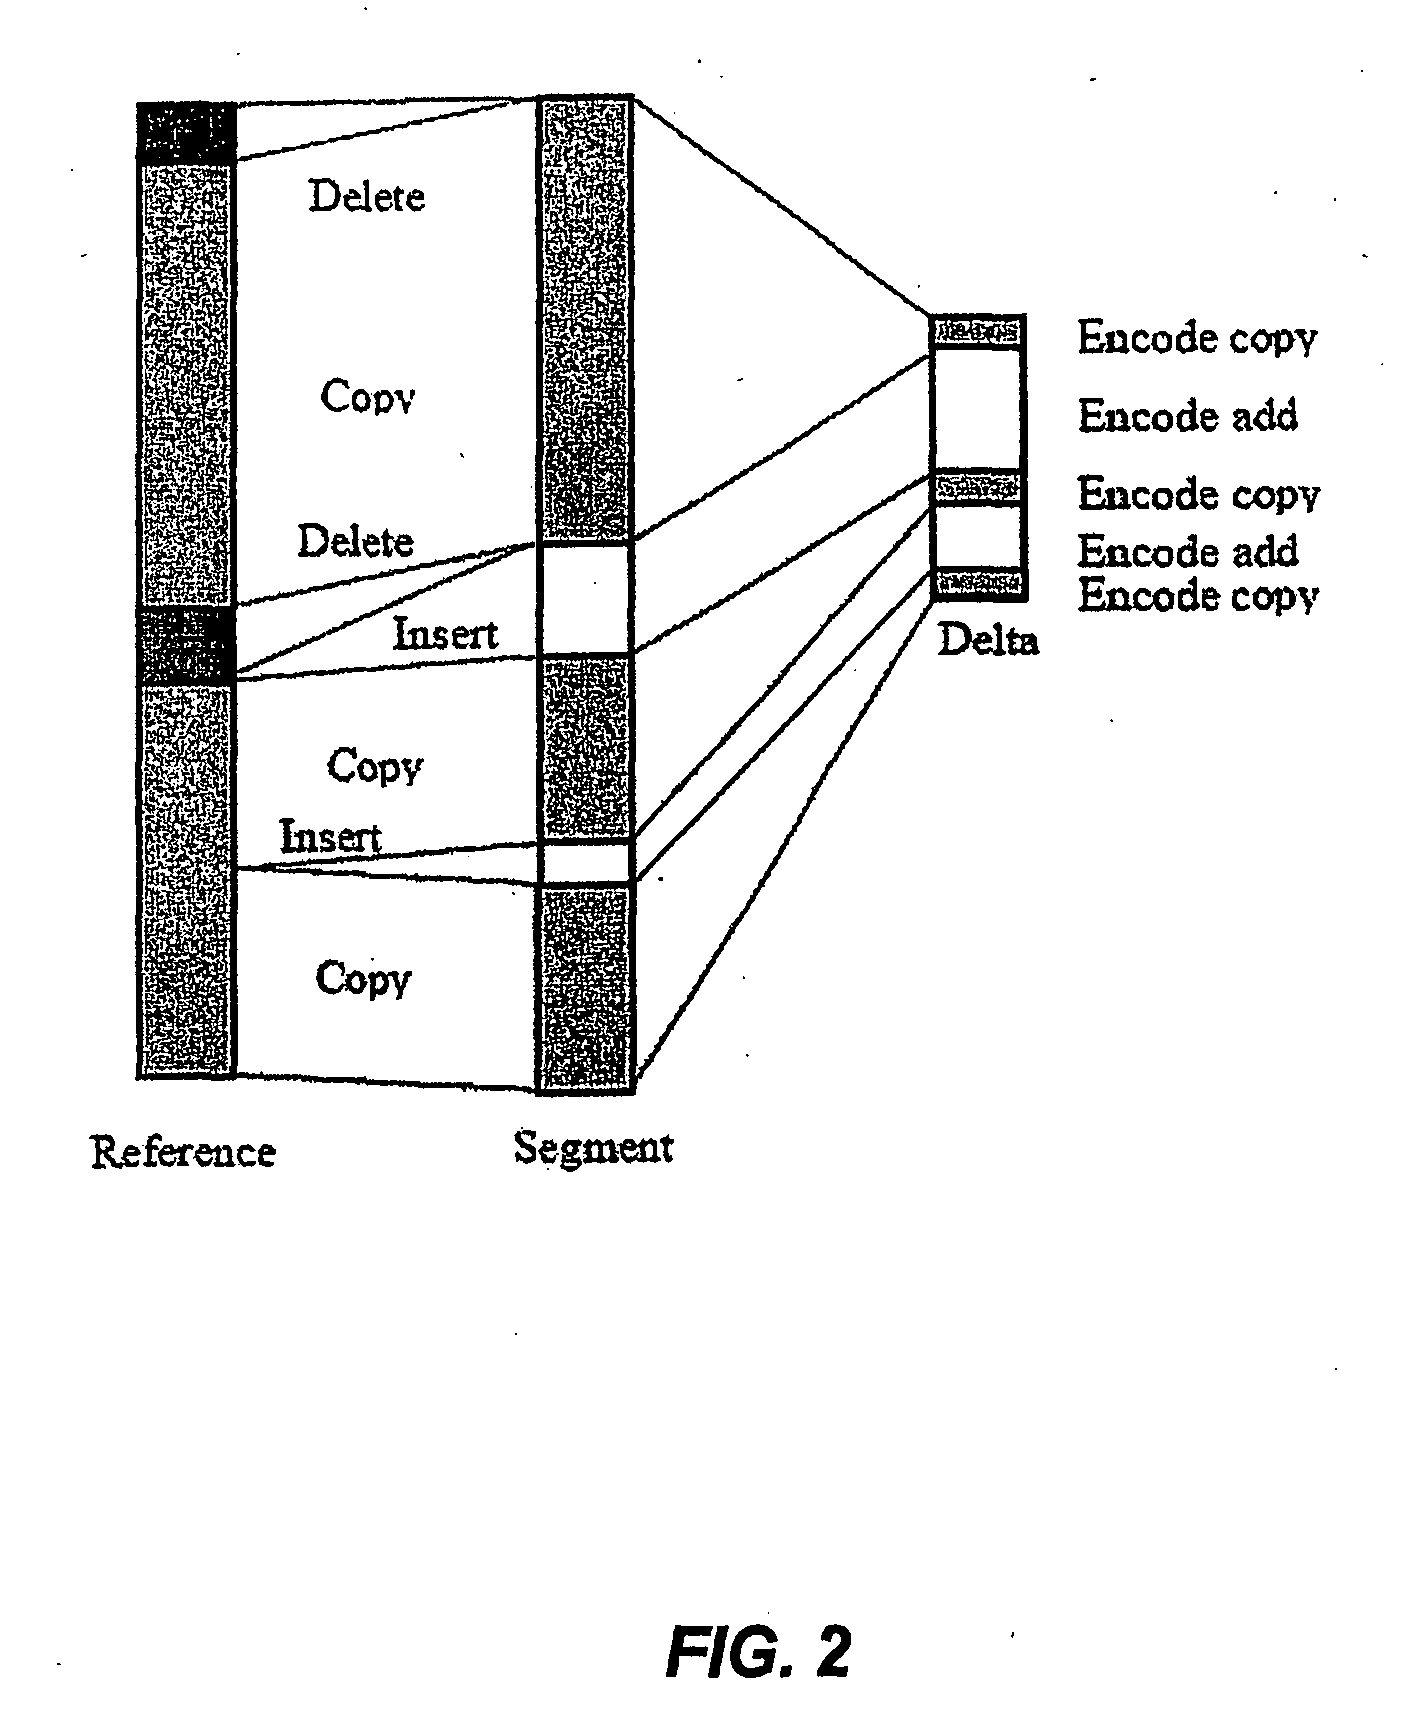 Methods and Systems for Compressing and Comparing Genomic Data